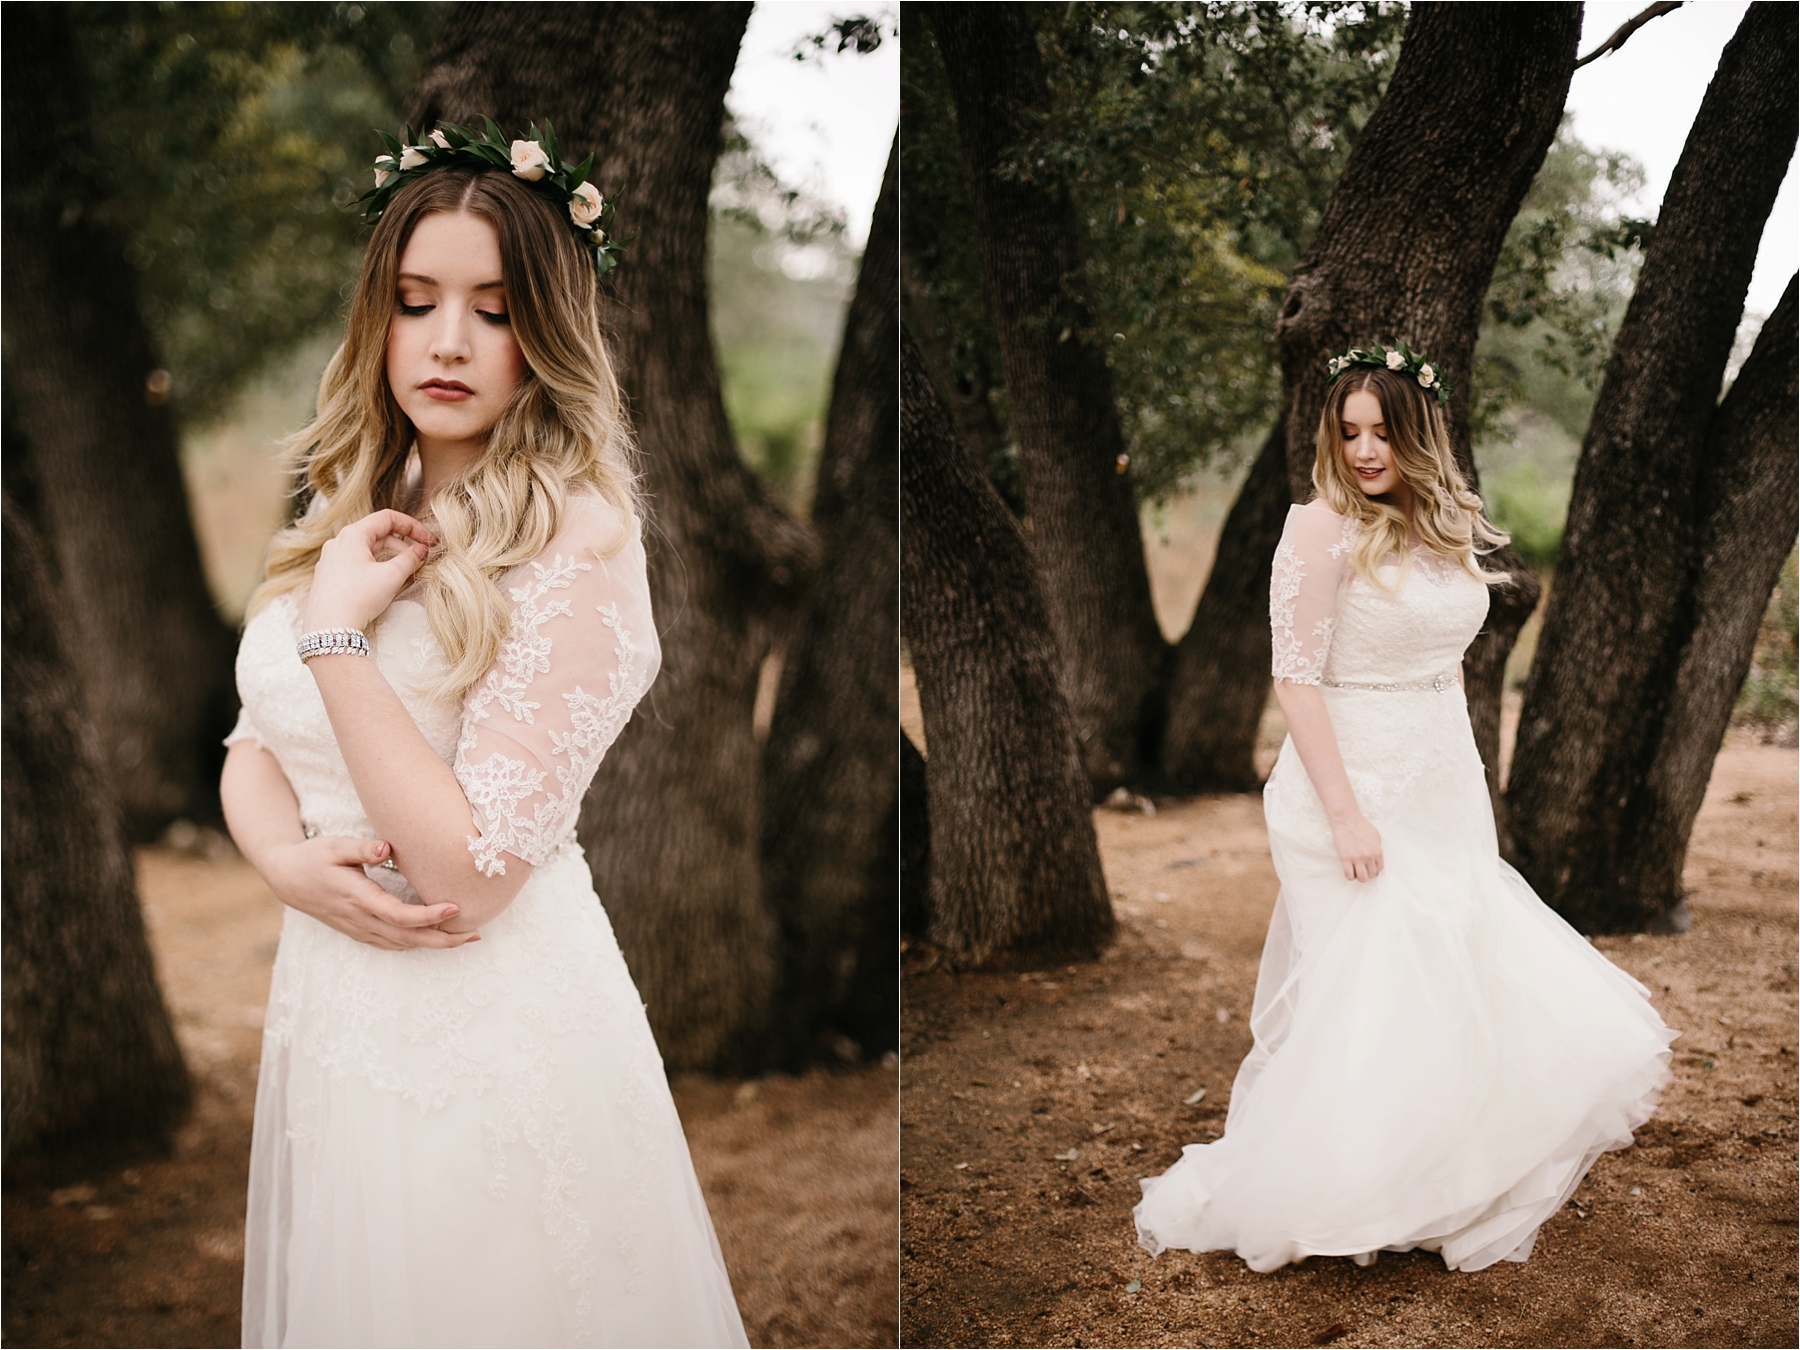 Ashley + Johnny || a DIY Texas Hill Country Wedding at the Prospect ...